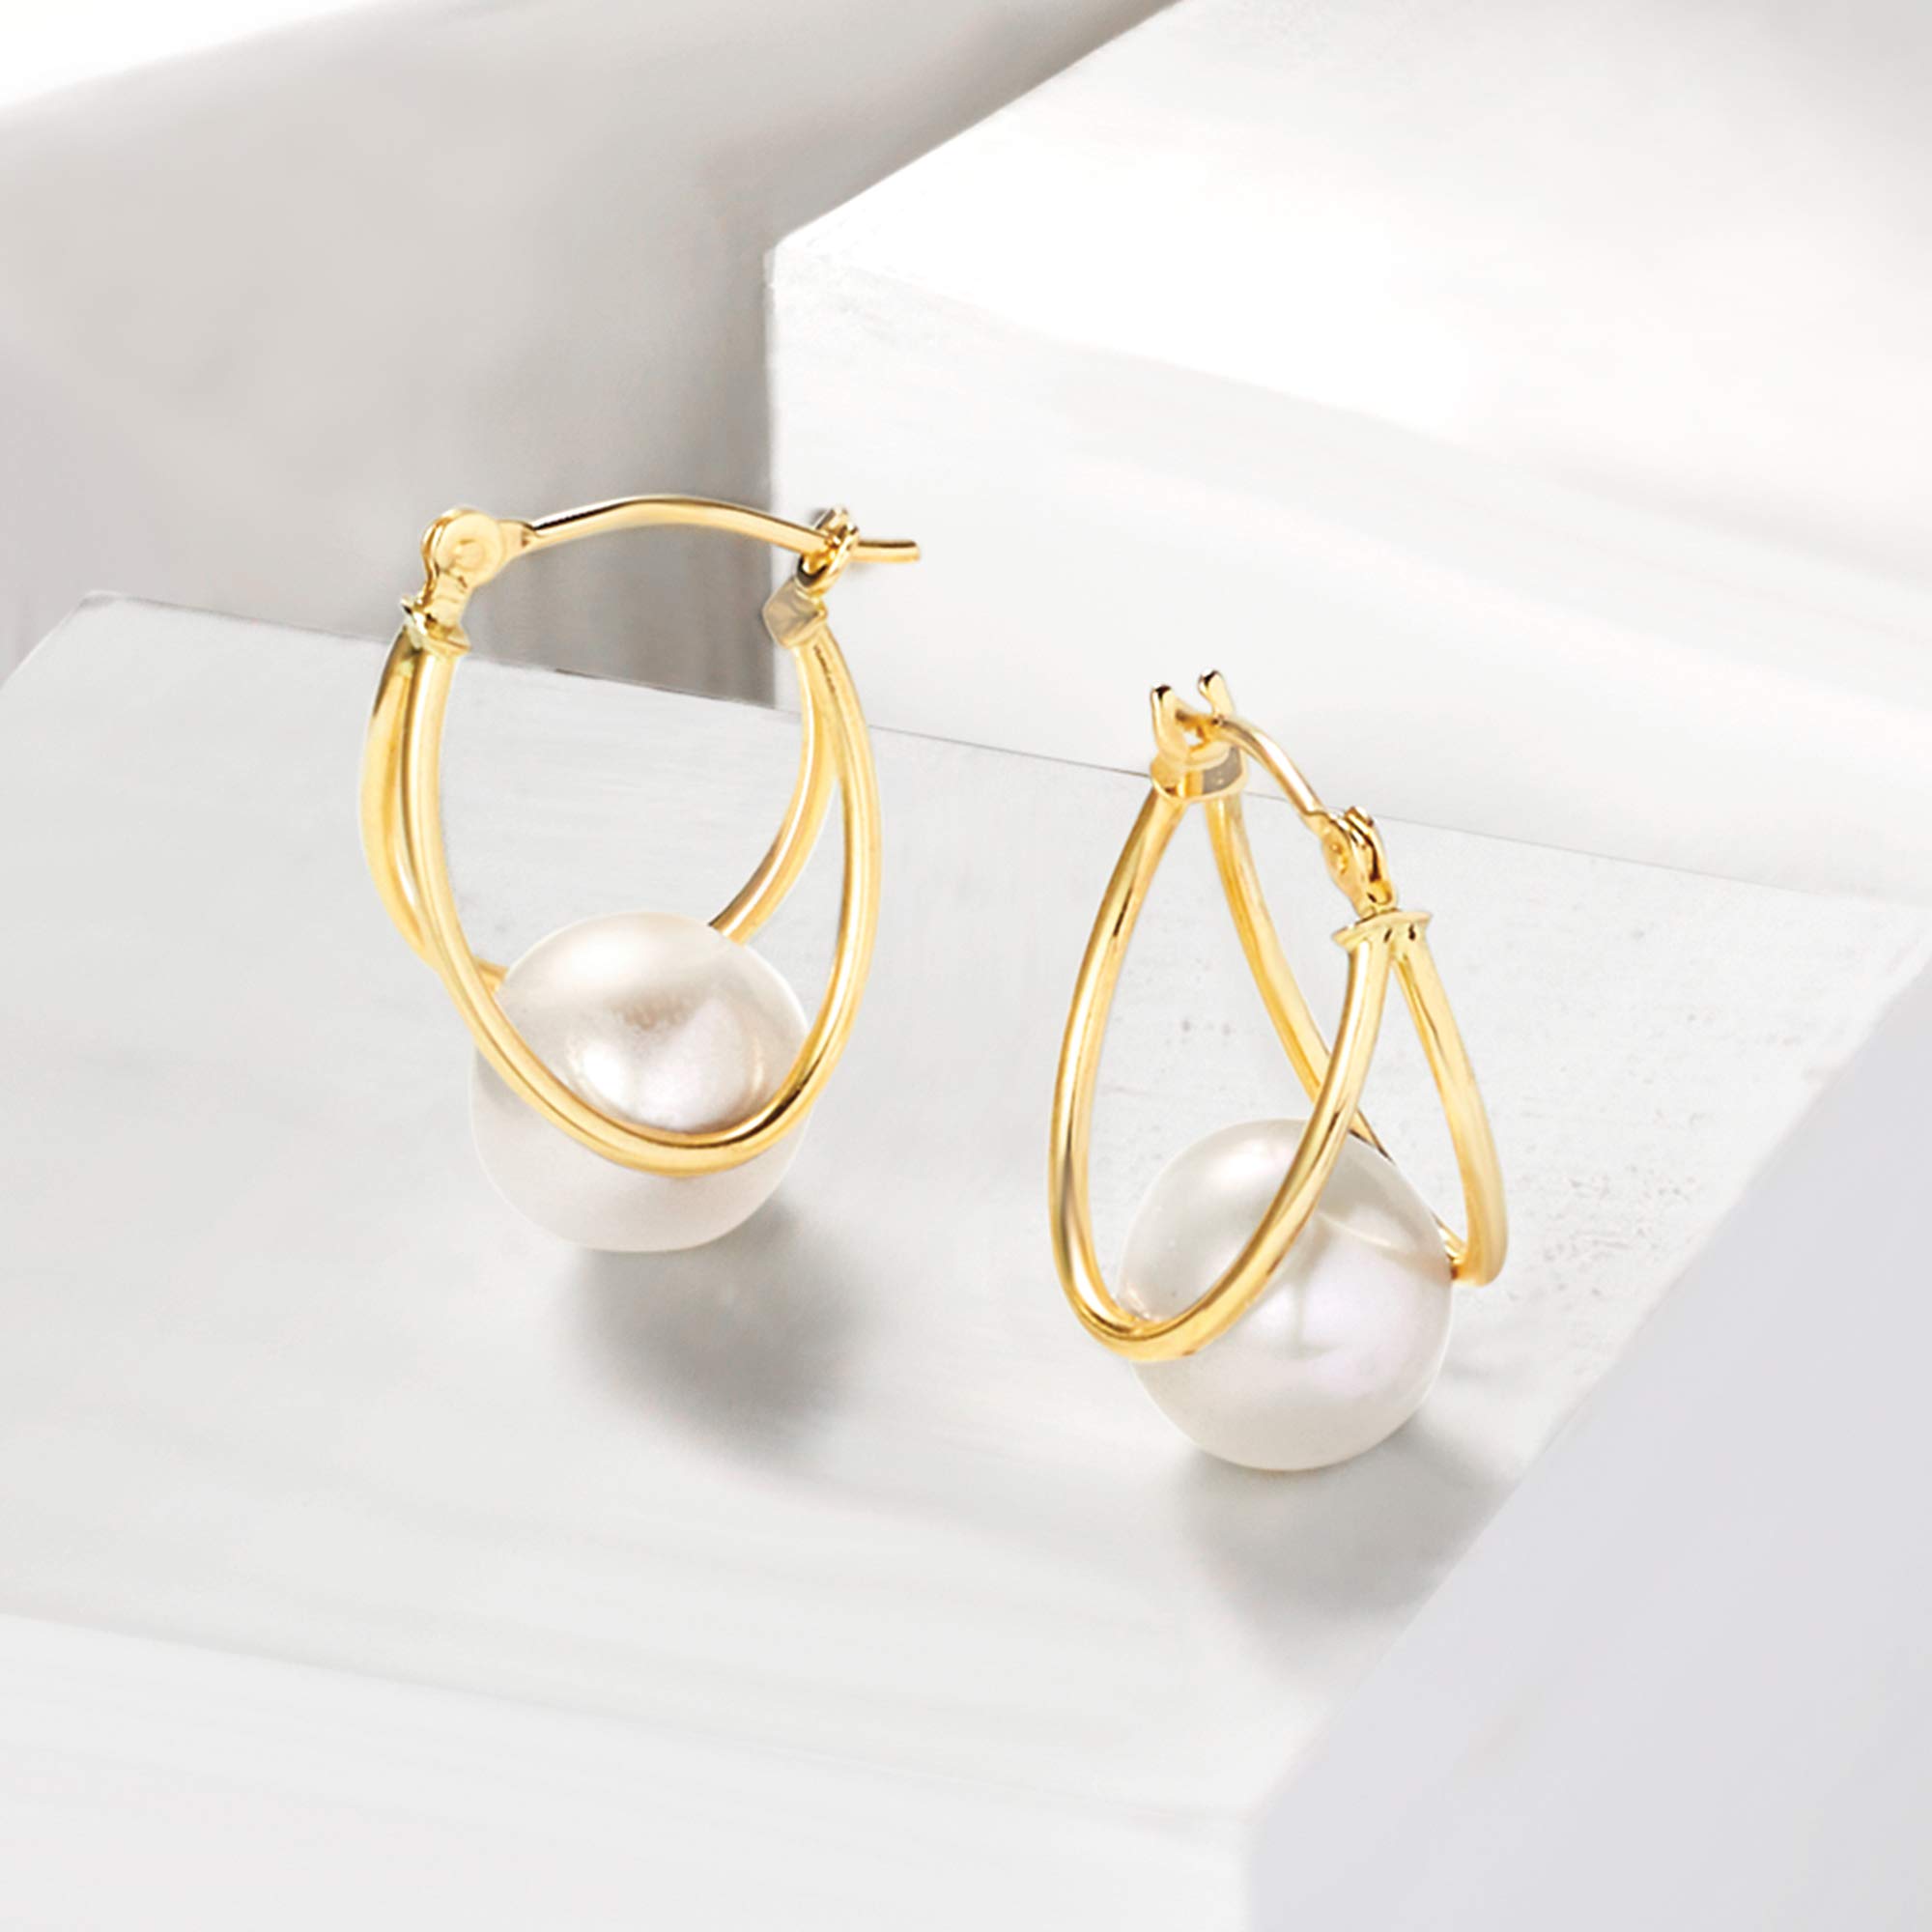 Ross-Simons 8-9mm Cultured Pearl Double-Hoop Earrings in 14kt Yellow Gold. 3/4